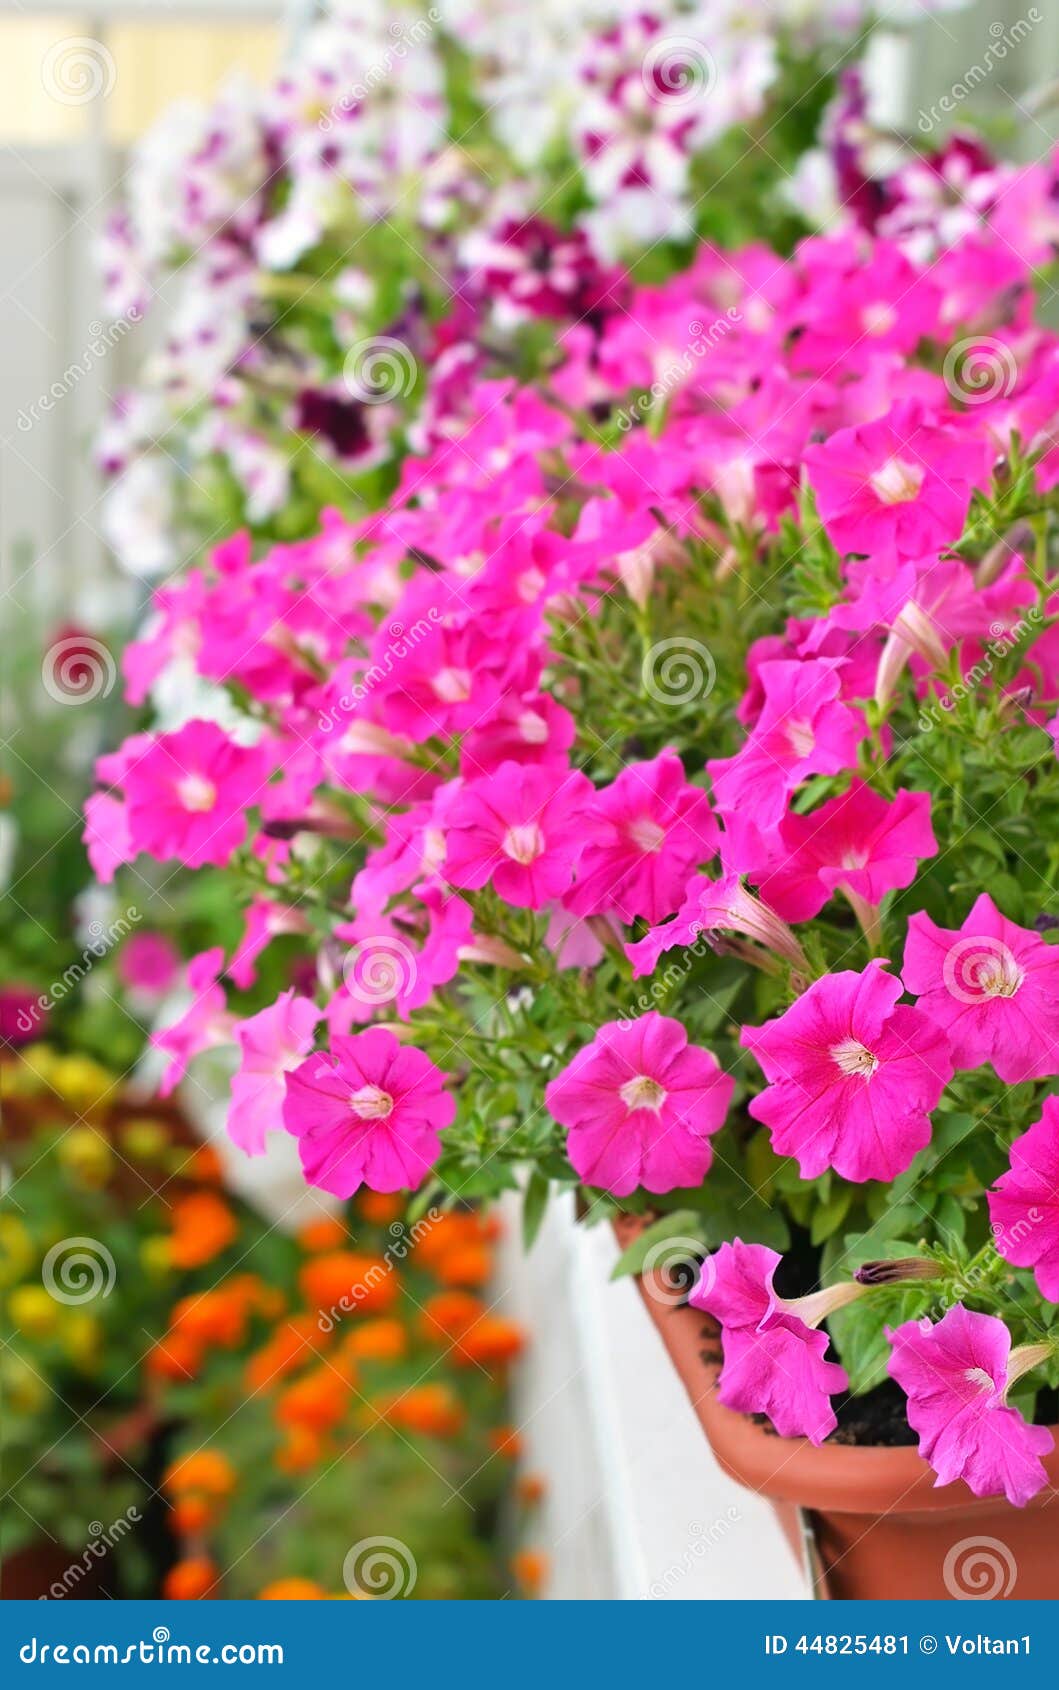 Petunia Flowers in Flower Pot on Balcony Stock Image - Image of flora ...